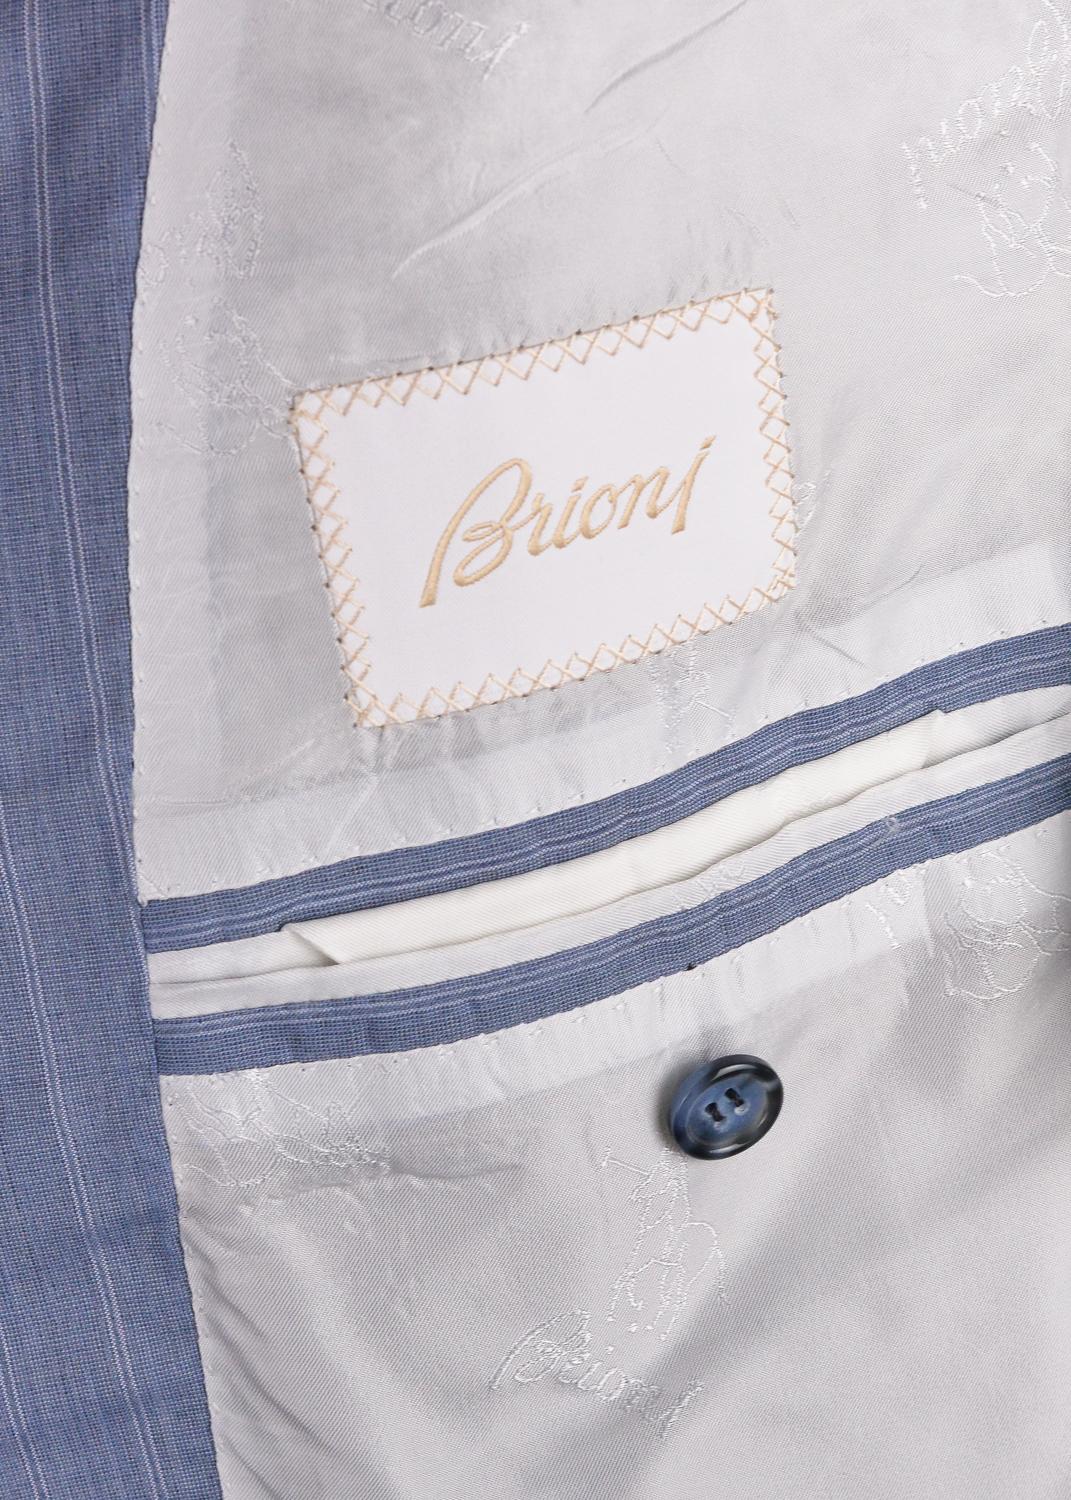 Honor yourself with the exquisitely tailored Brioni Senato suit. This uniquely crafted blue suit features the classic white based pin stripes, marble blue tonal buttons, and complimentary notch lapel. Brioni's harmonious blend of silk and recycled